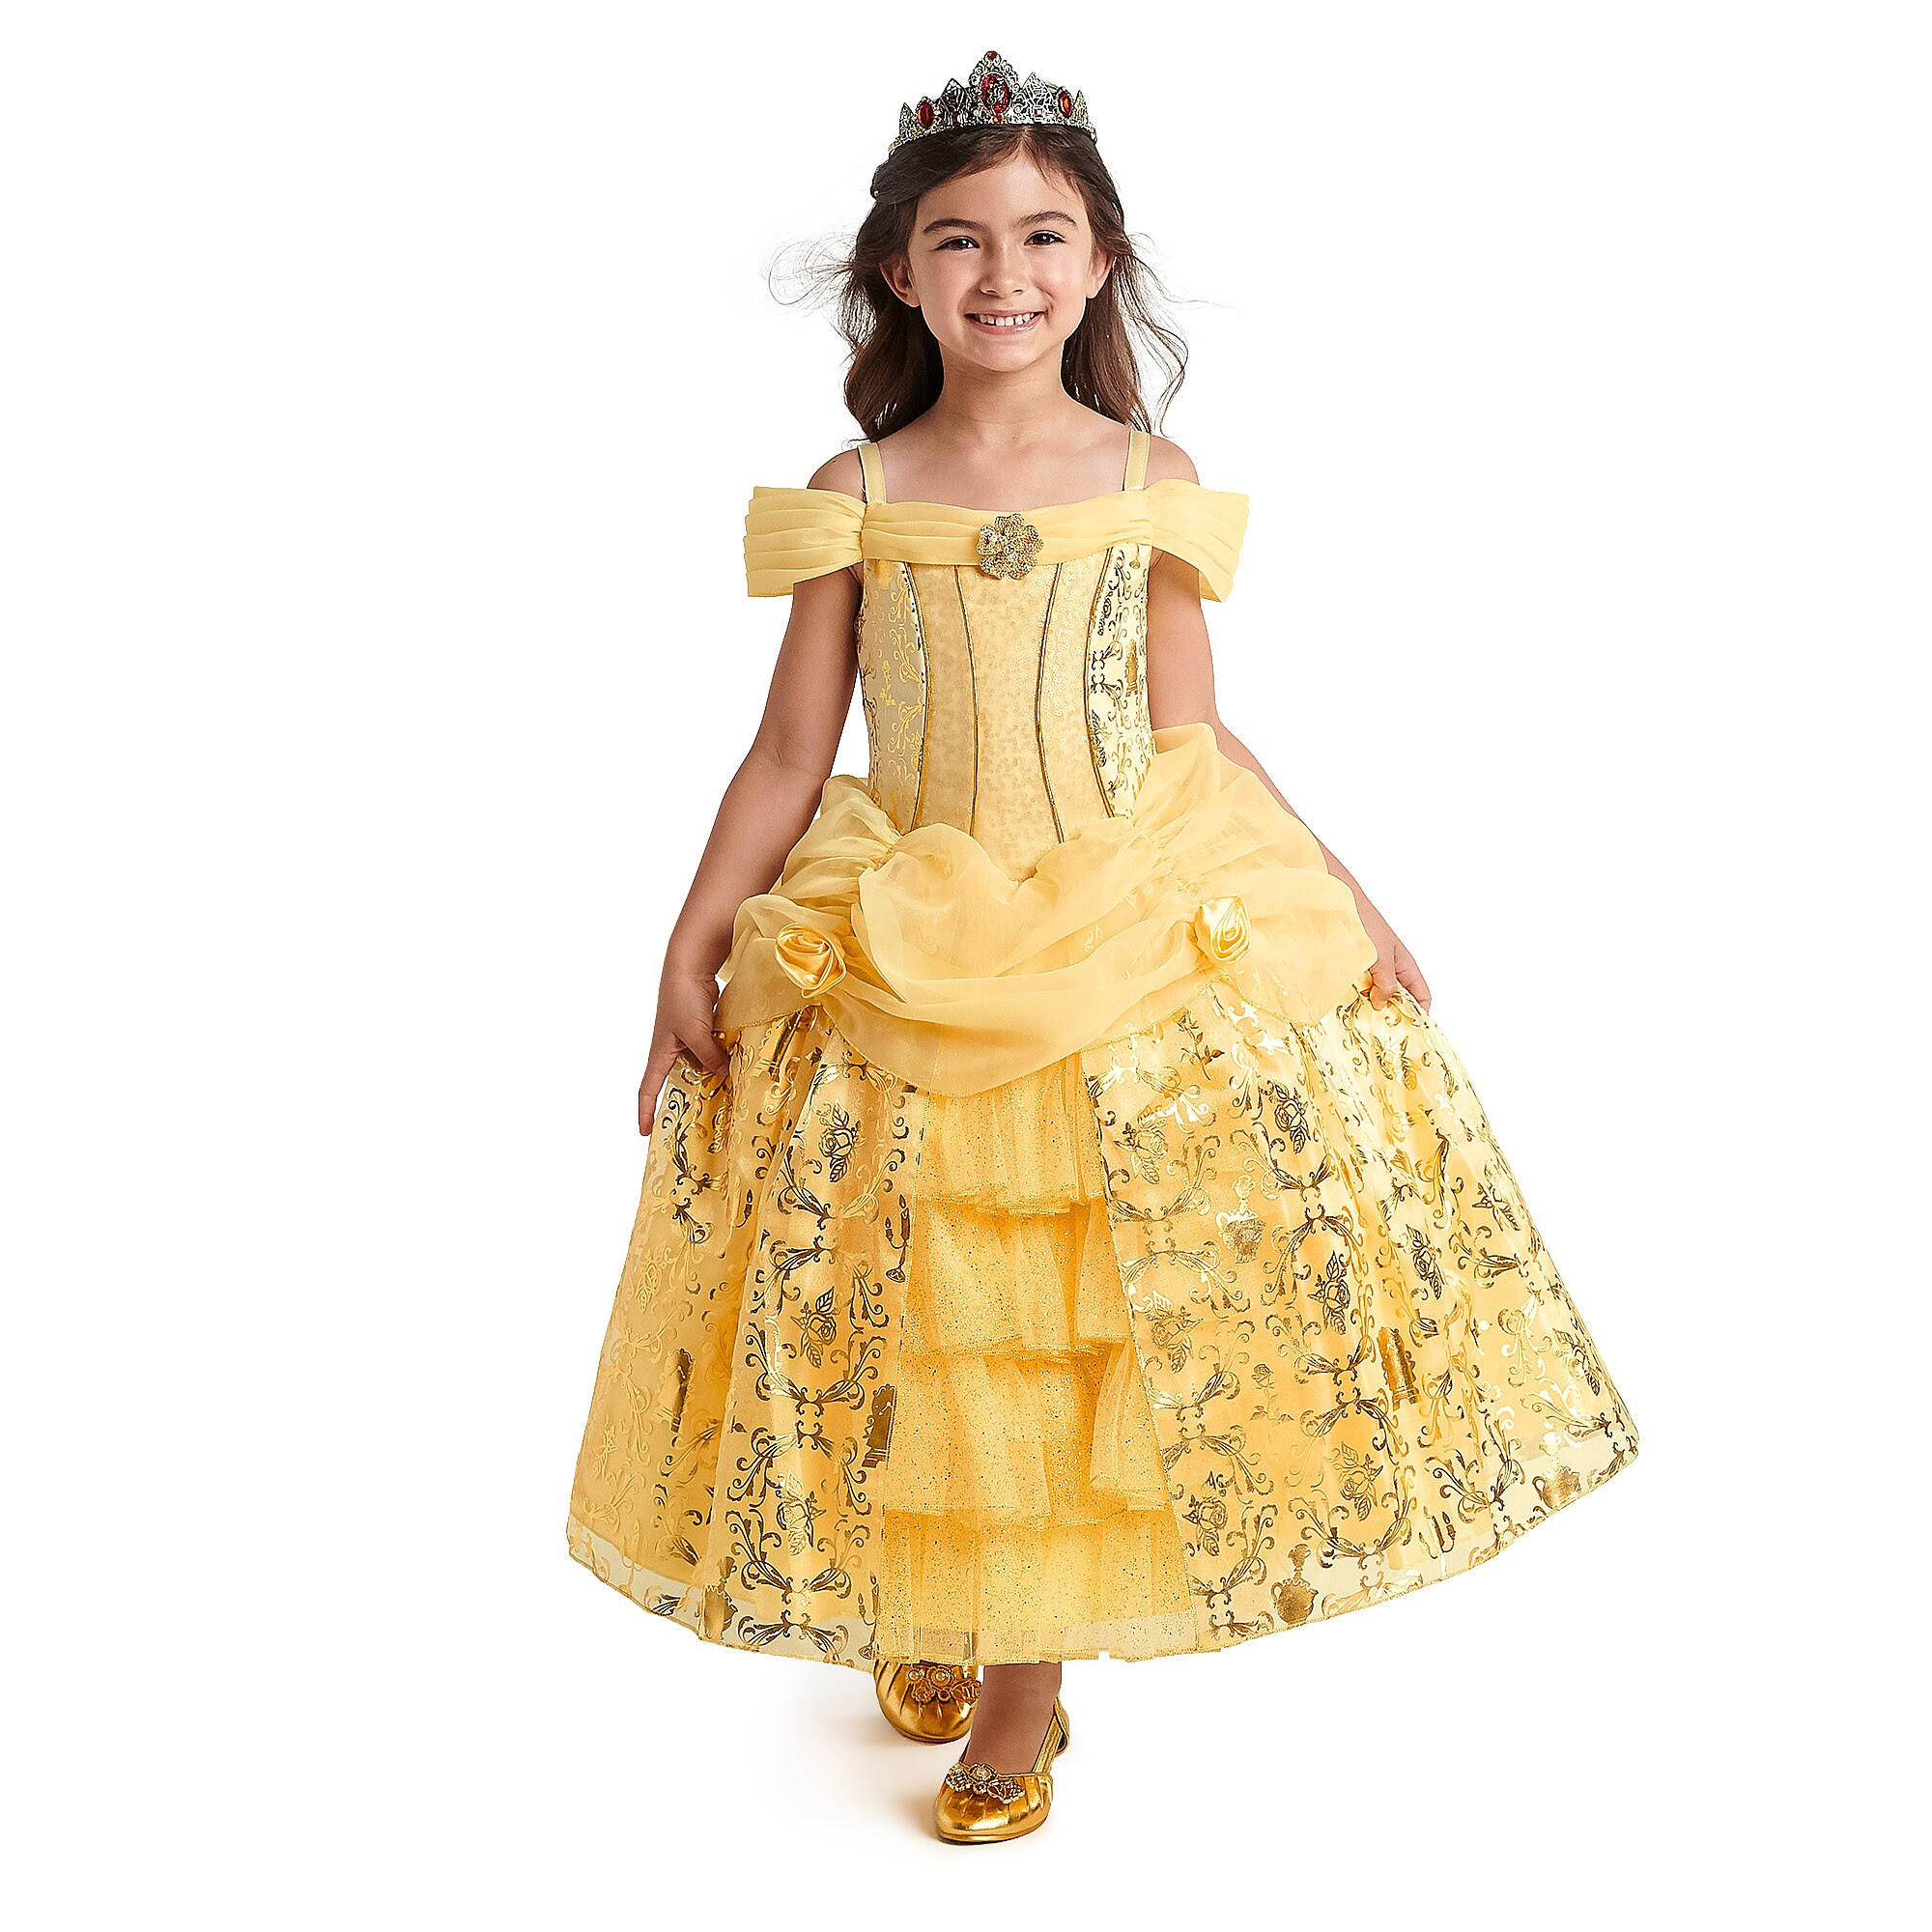 Belle Deluxe Costume for Kids Beauty and the Beast now out for